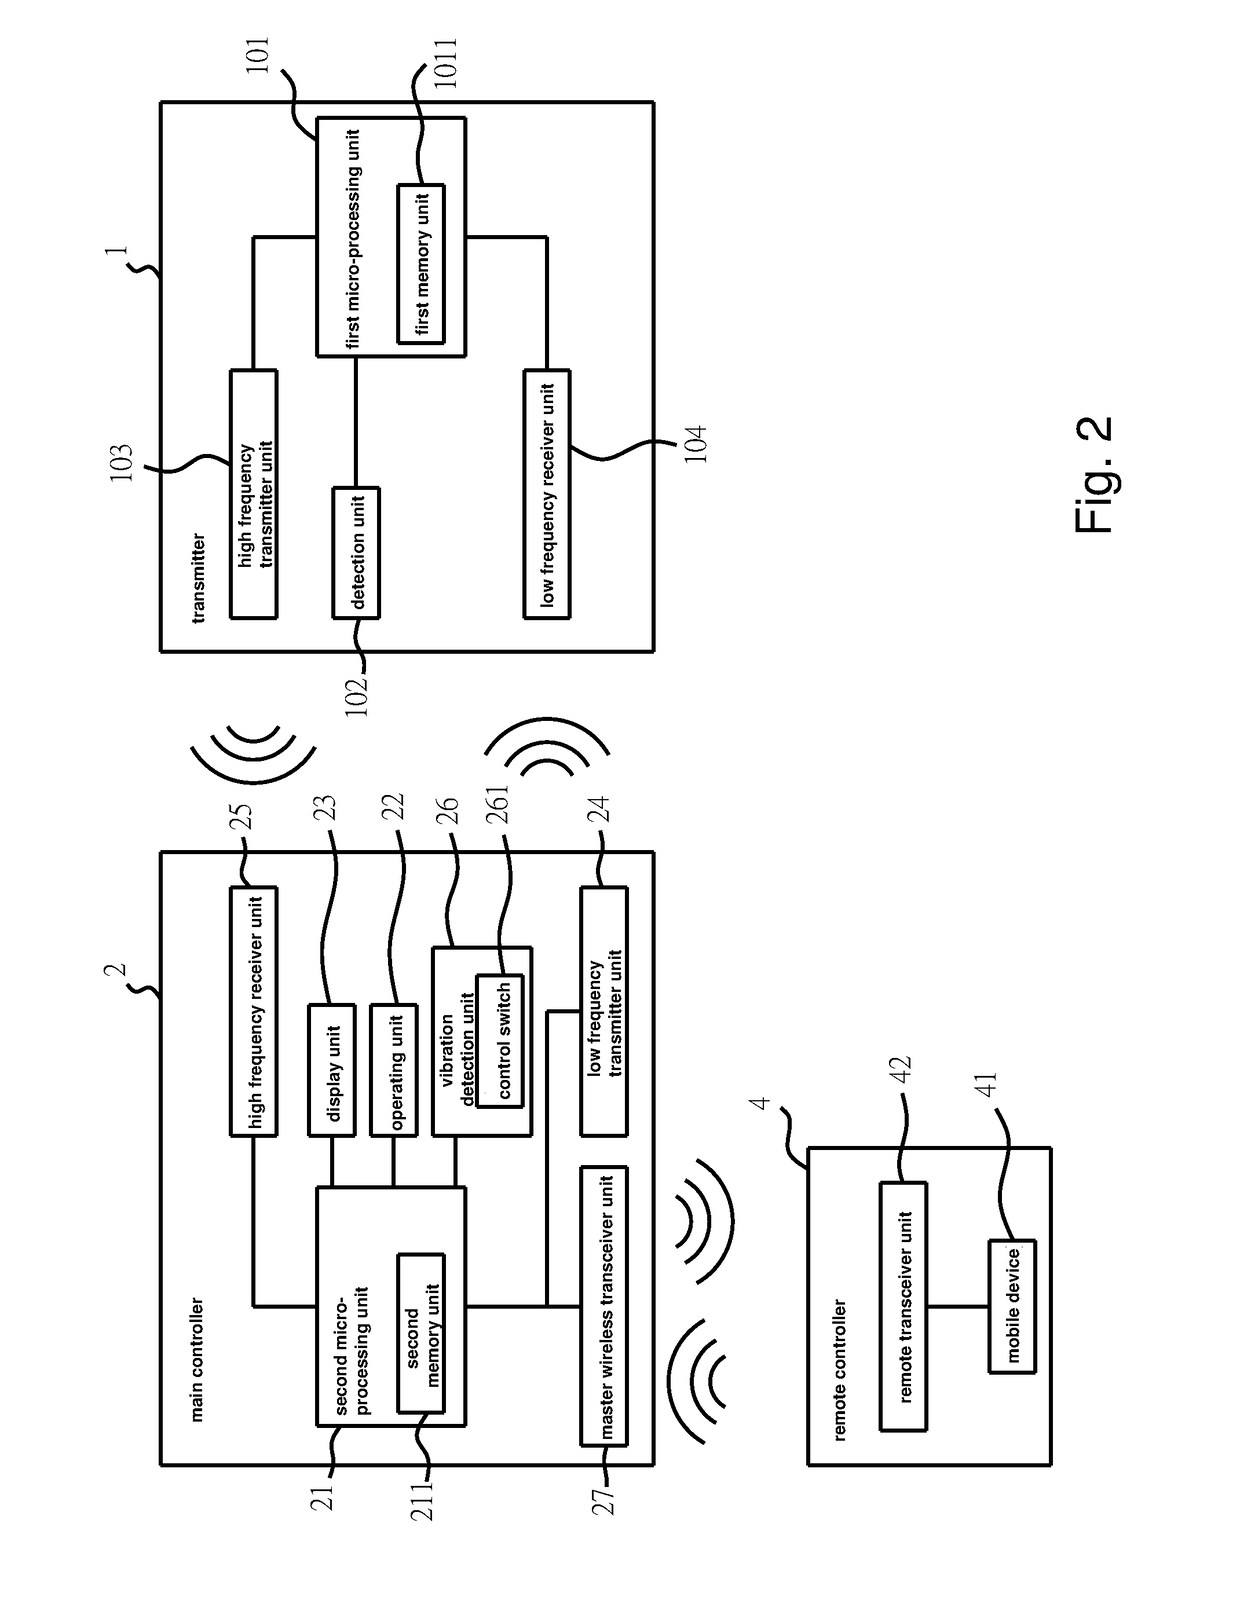 Method and system for tire pressure monitoring system (TPMS) with wireless tire condition sensing and warning